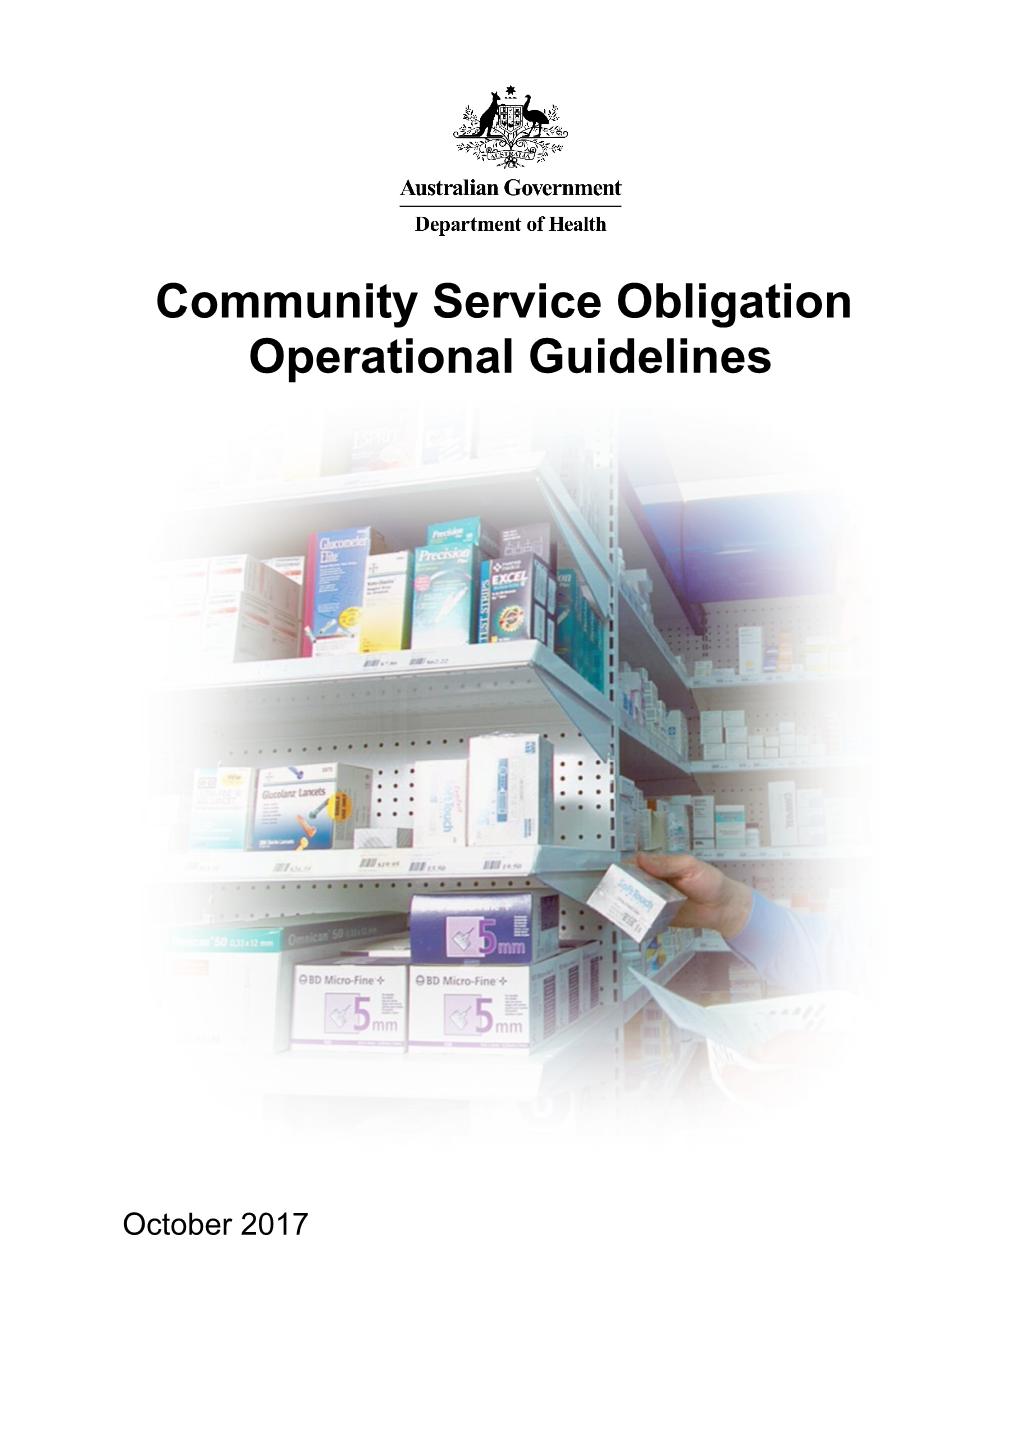 CSO Operational Guidelines May 2017